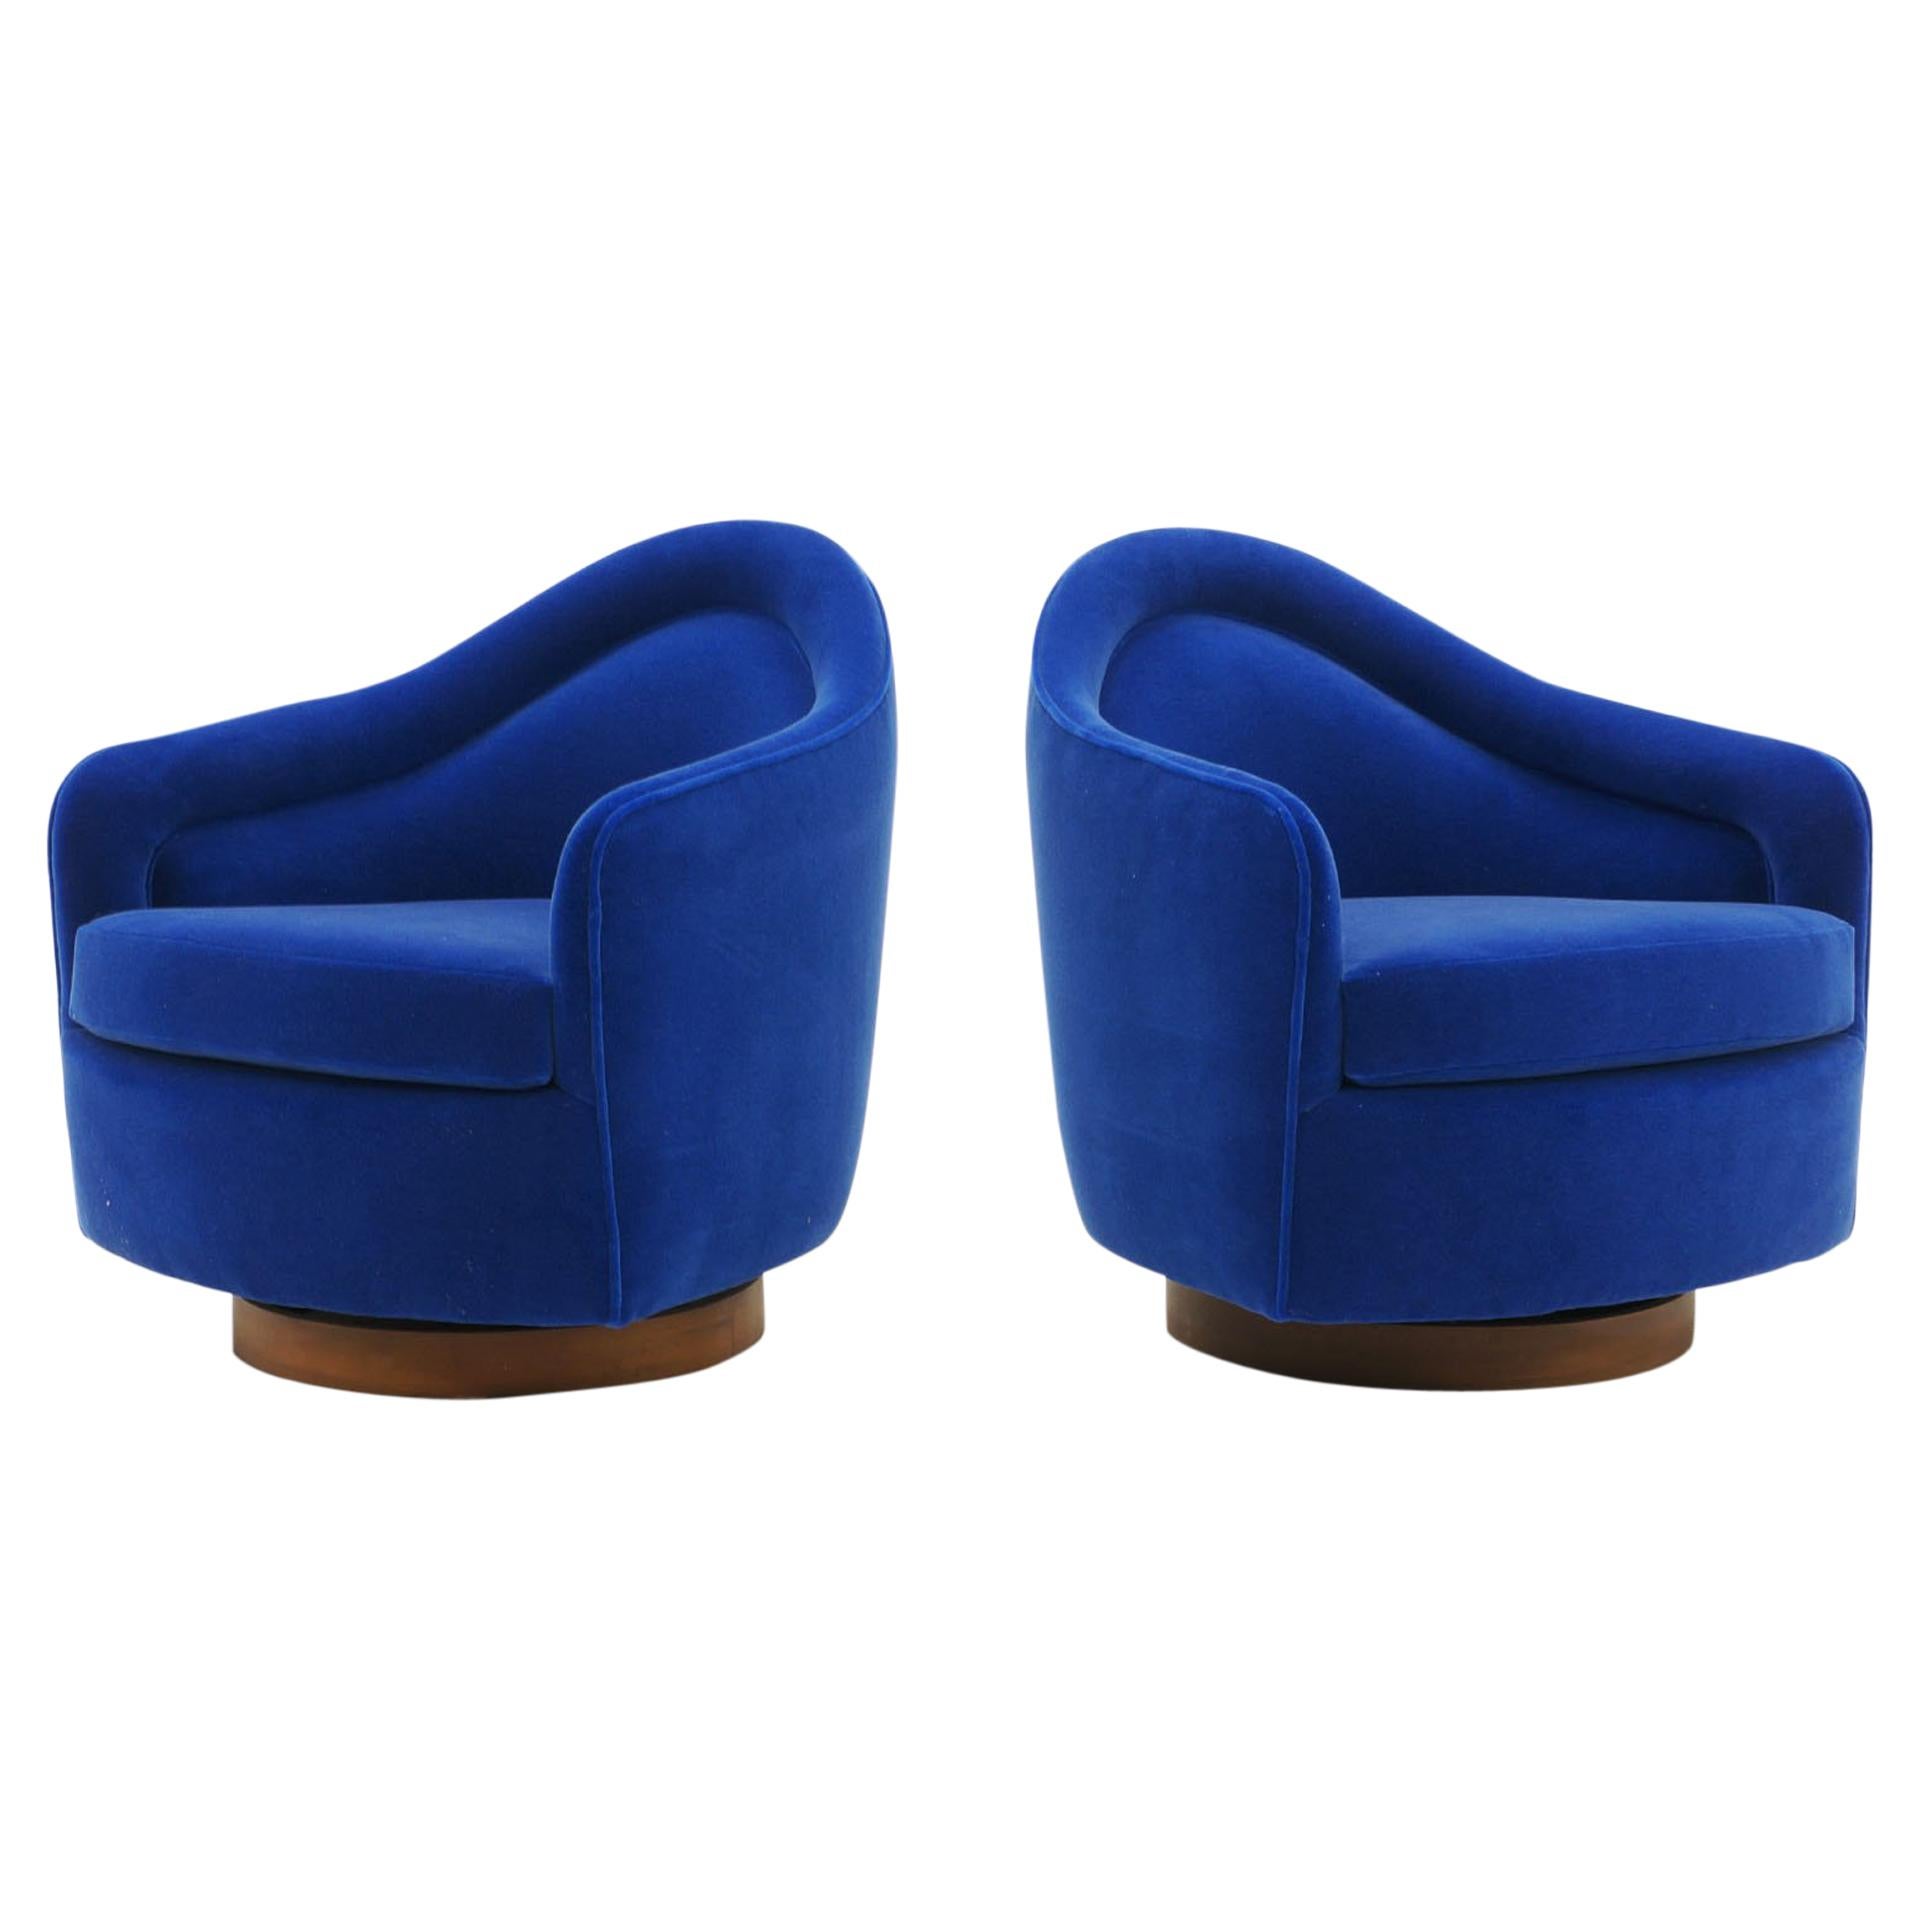 Pair of Tilt Swivel Club Chairs in Blue Mohair by Milo Baughman, Exceptional Set